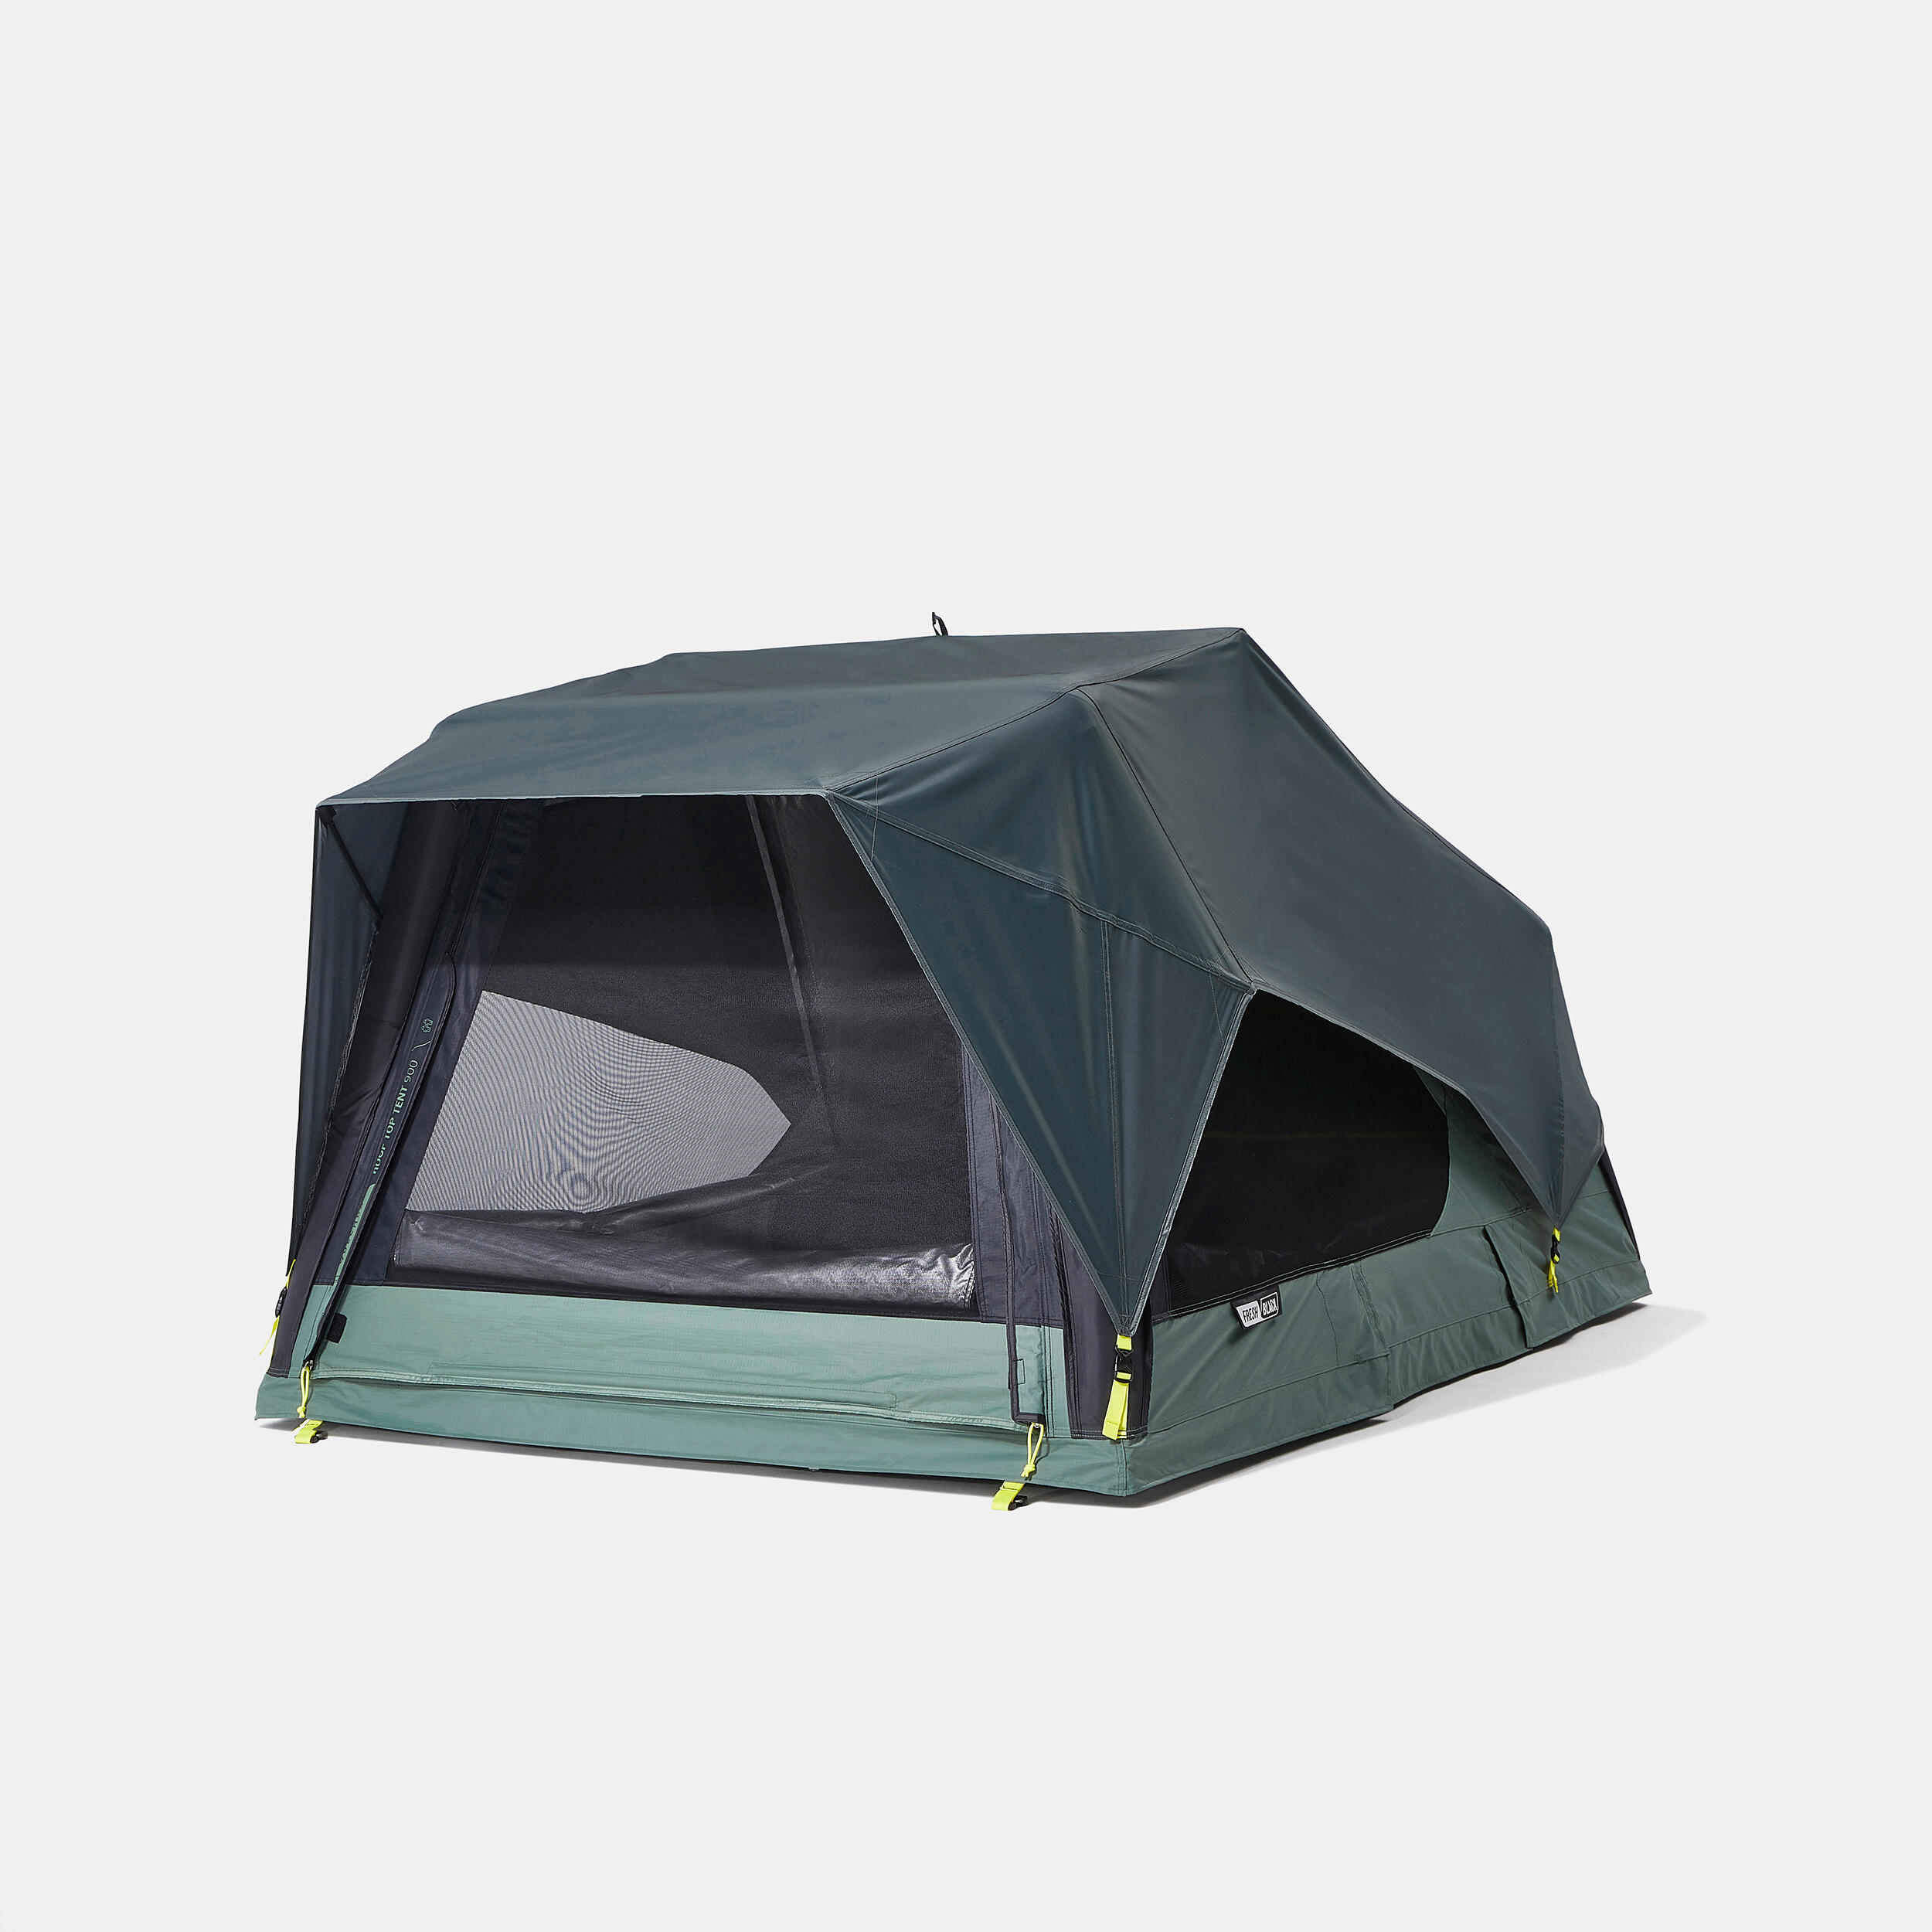 INFLATABLE ROOF TENT MH900 FRESH & BLACK 2 PERSON  14/20